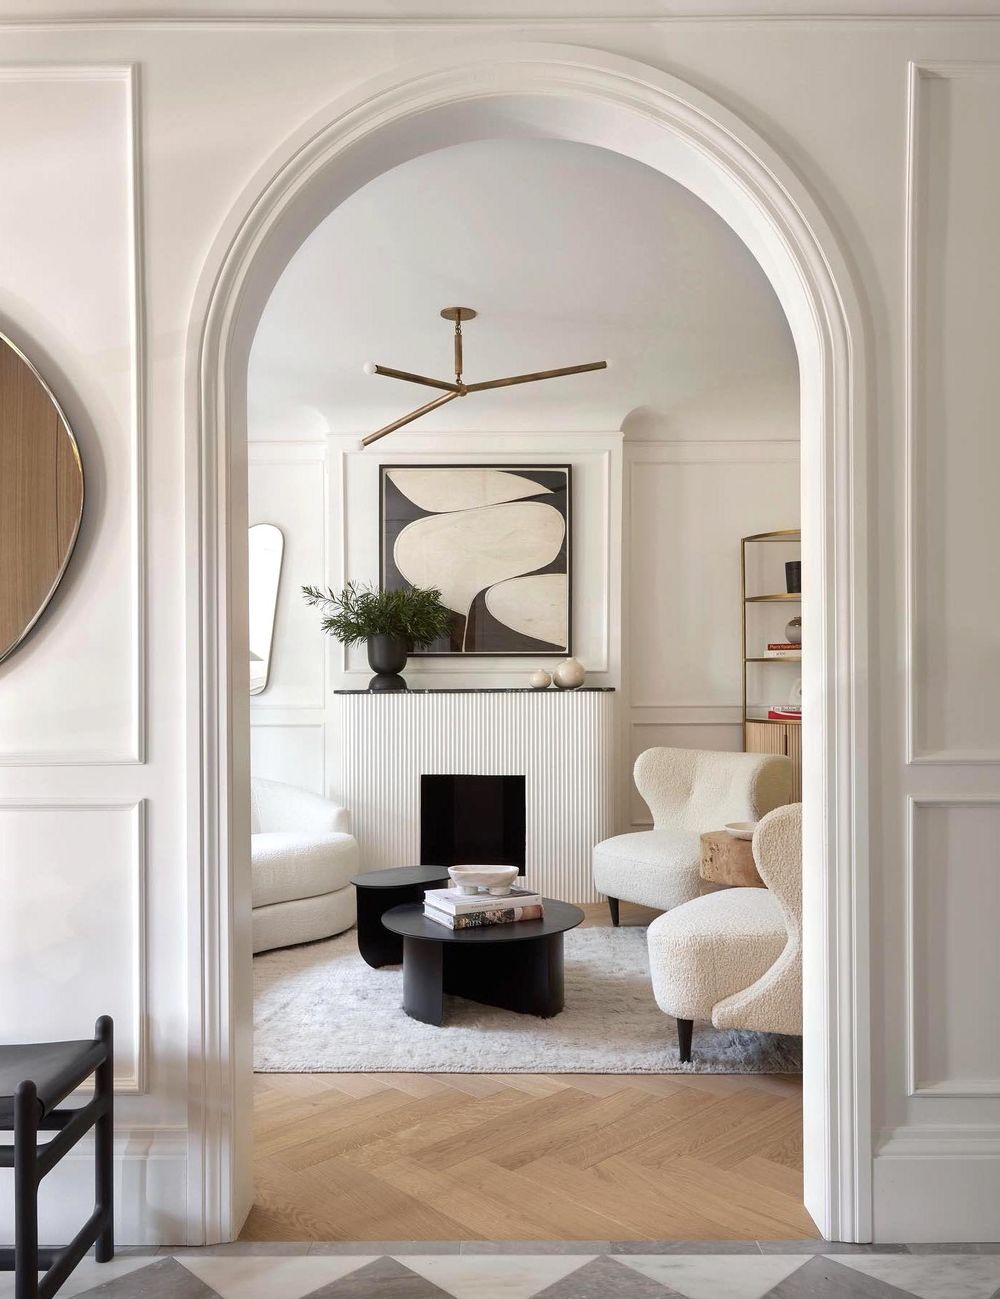 Arches in Interior Design: 26 Projects that Reimagine the Classical Shape |  ArchDaily